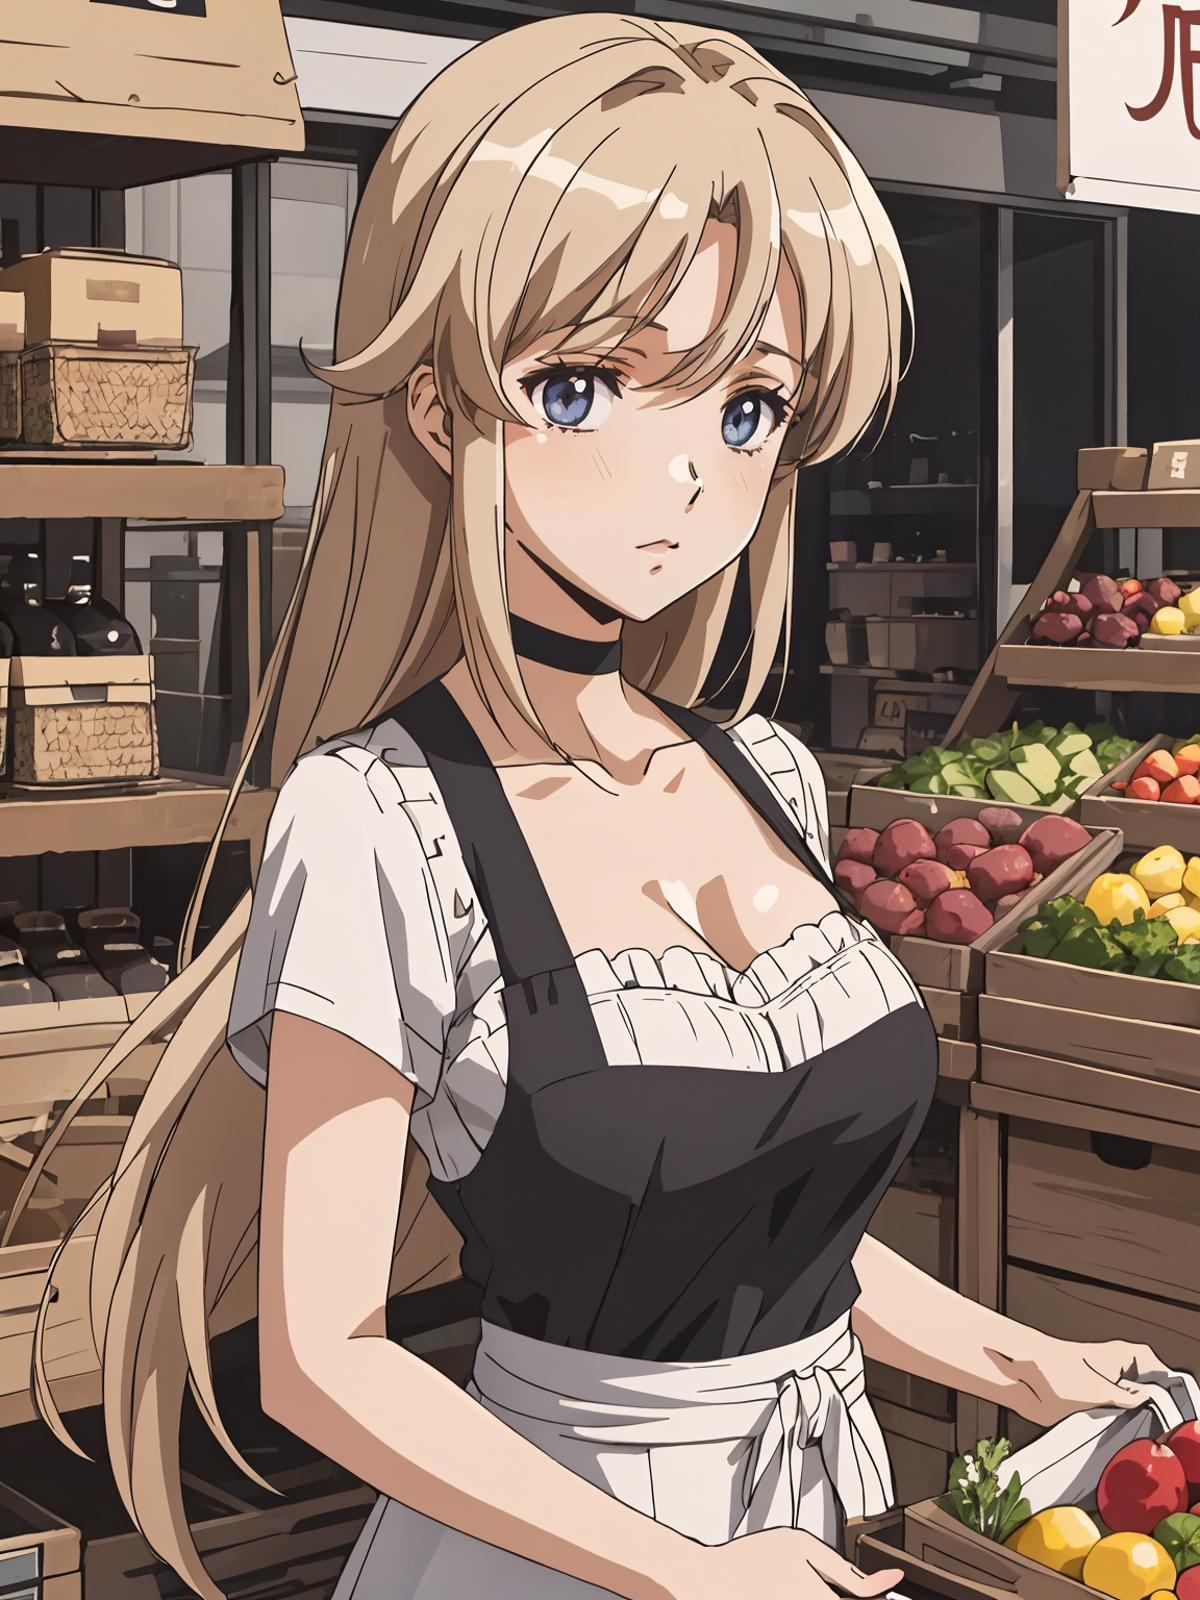 A girl with blonde hair wearing an apron and standing in front of a fruit stand.